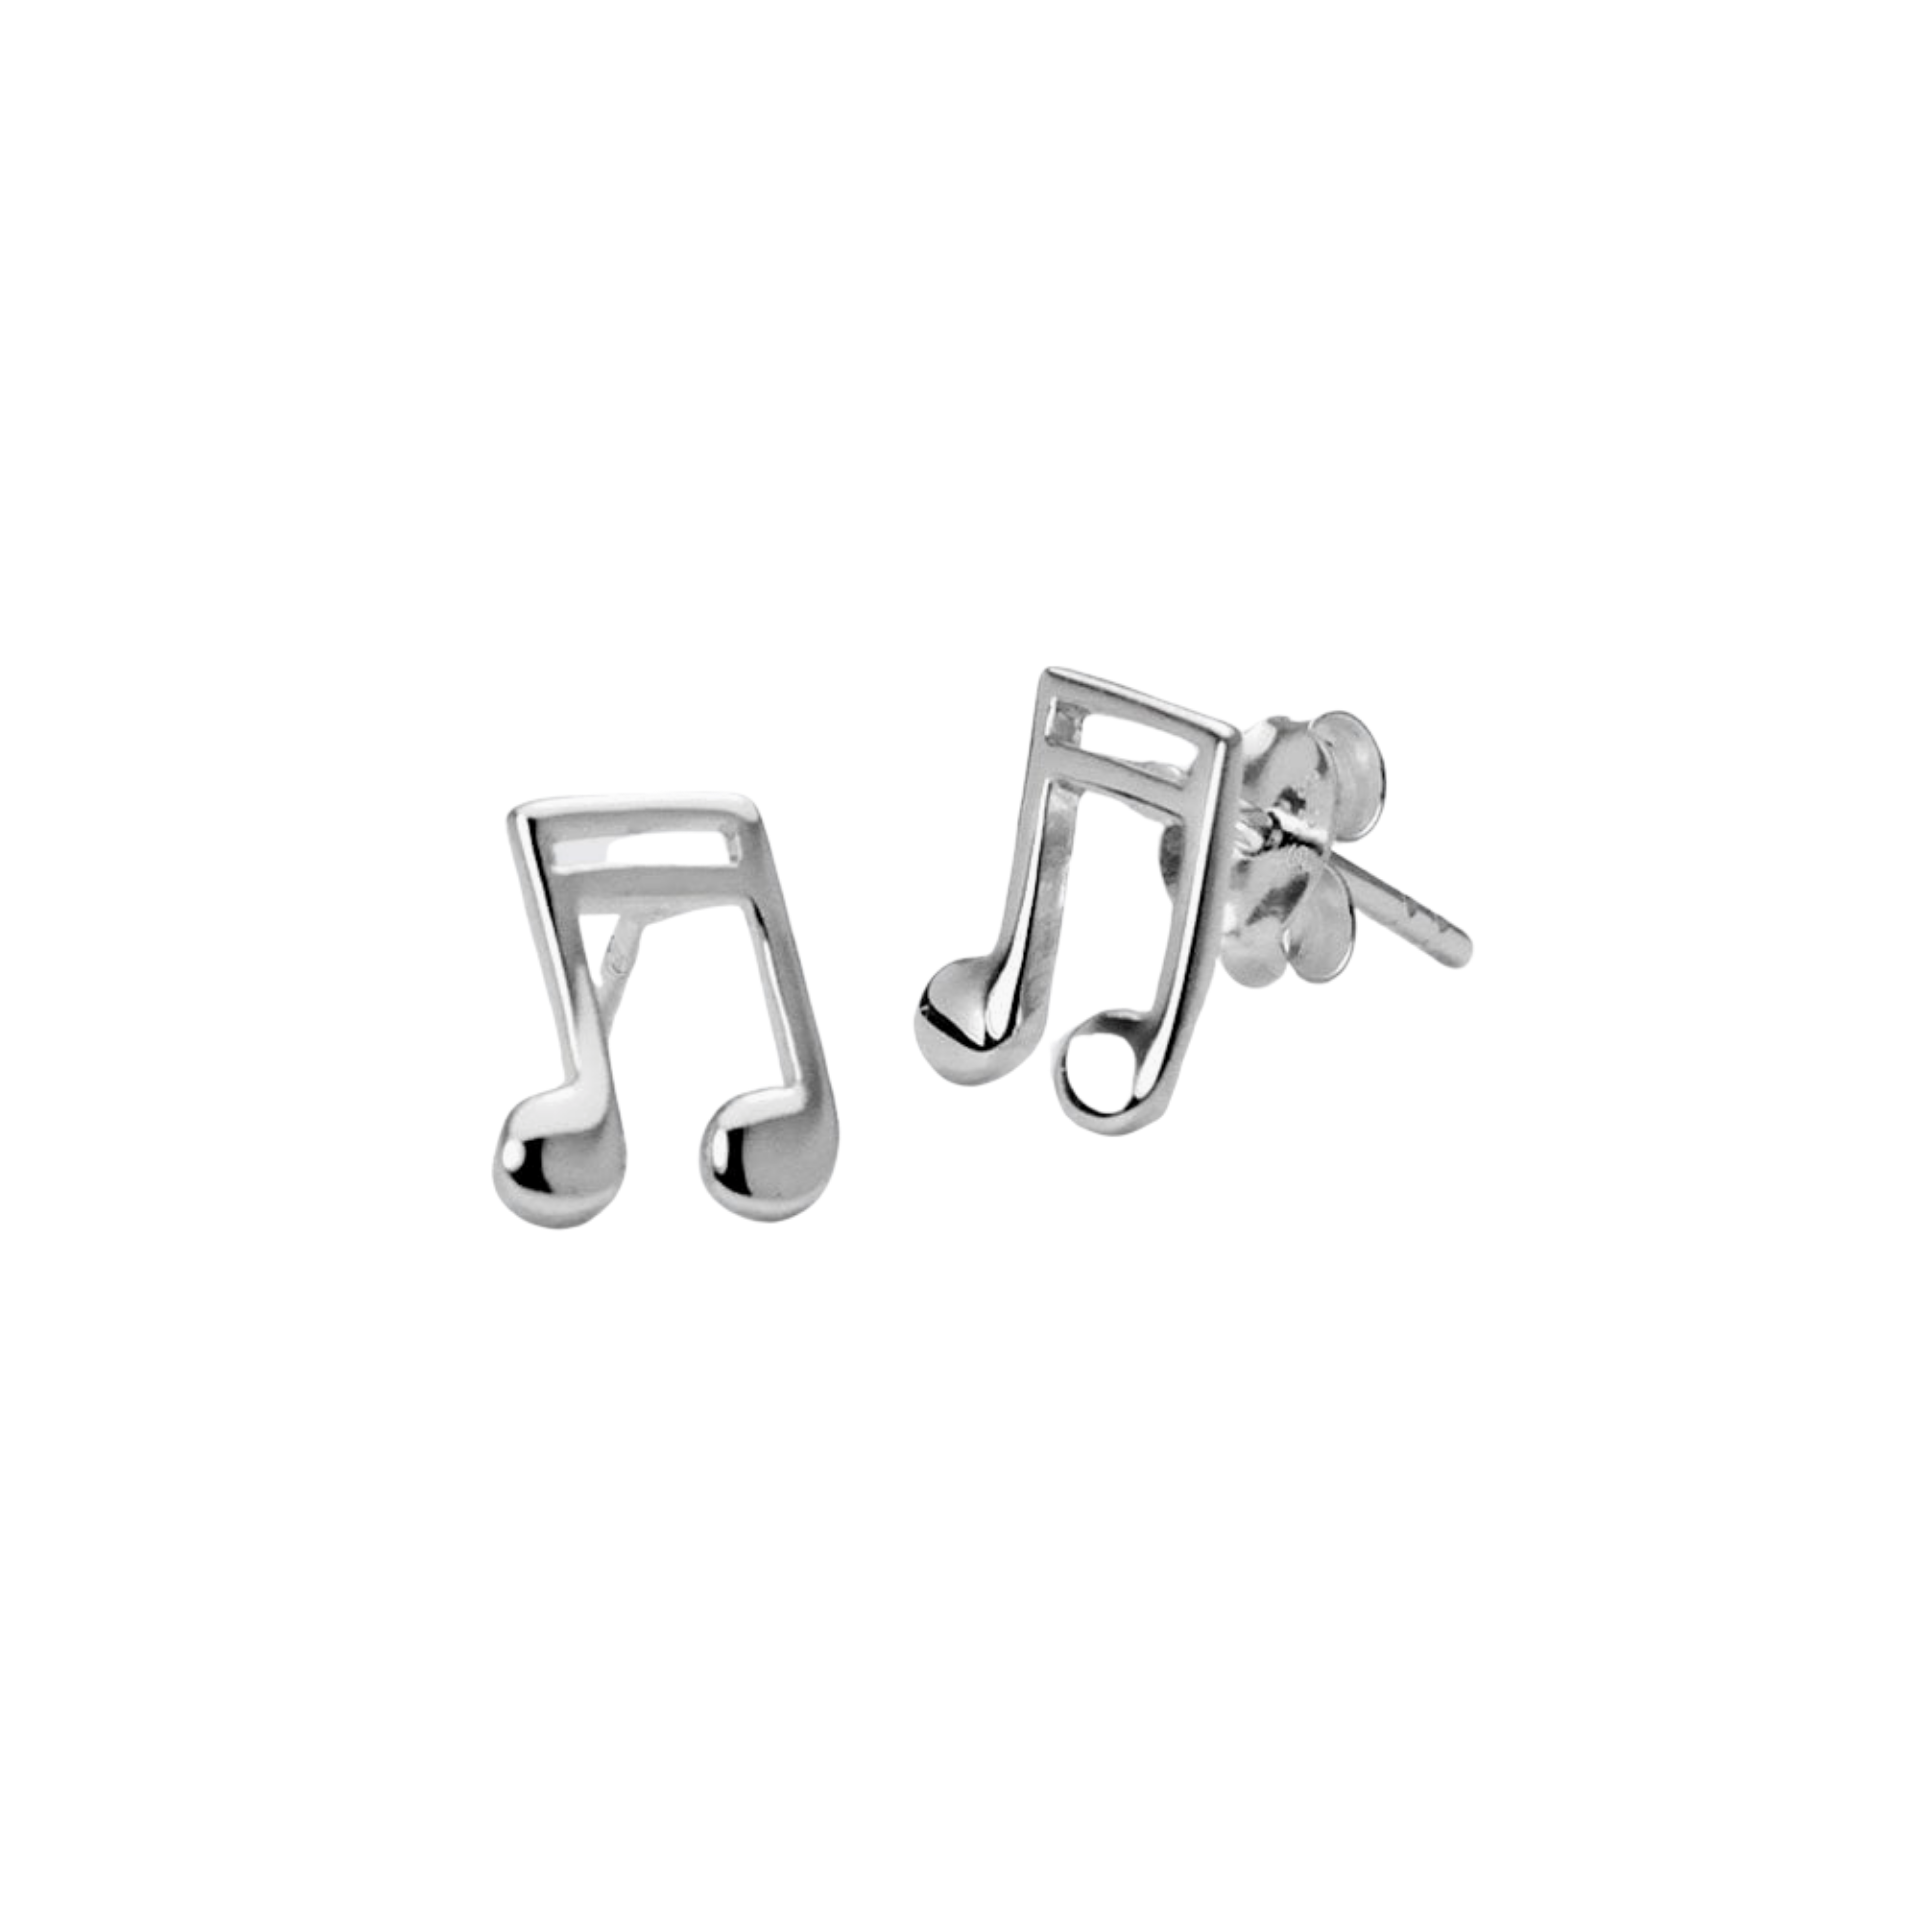 A musical note made from sterling silver with a high polish finish. A pair of Beam Notes  for music lovers.